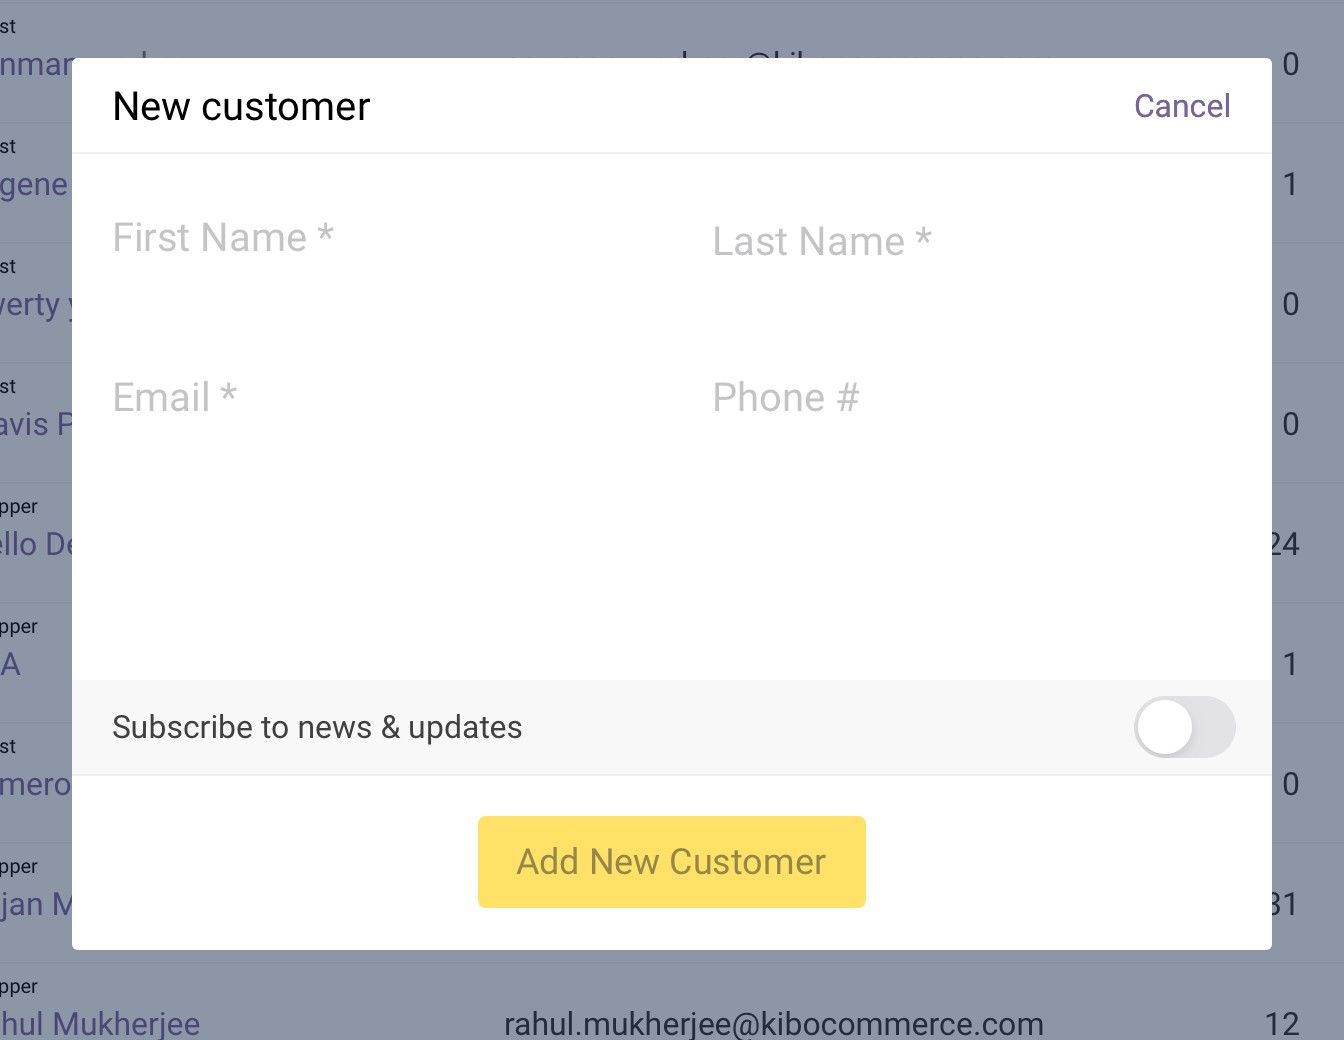 Pop-up prompting the user to set configurations for a new customer